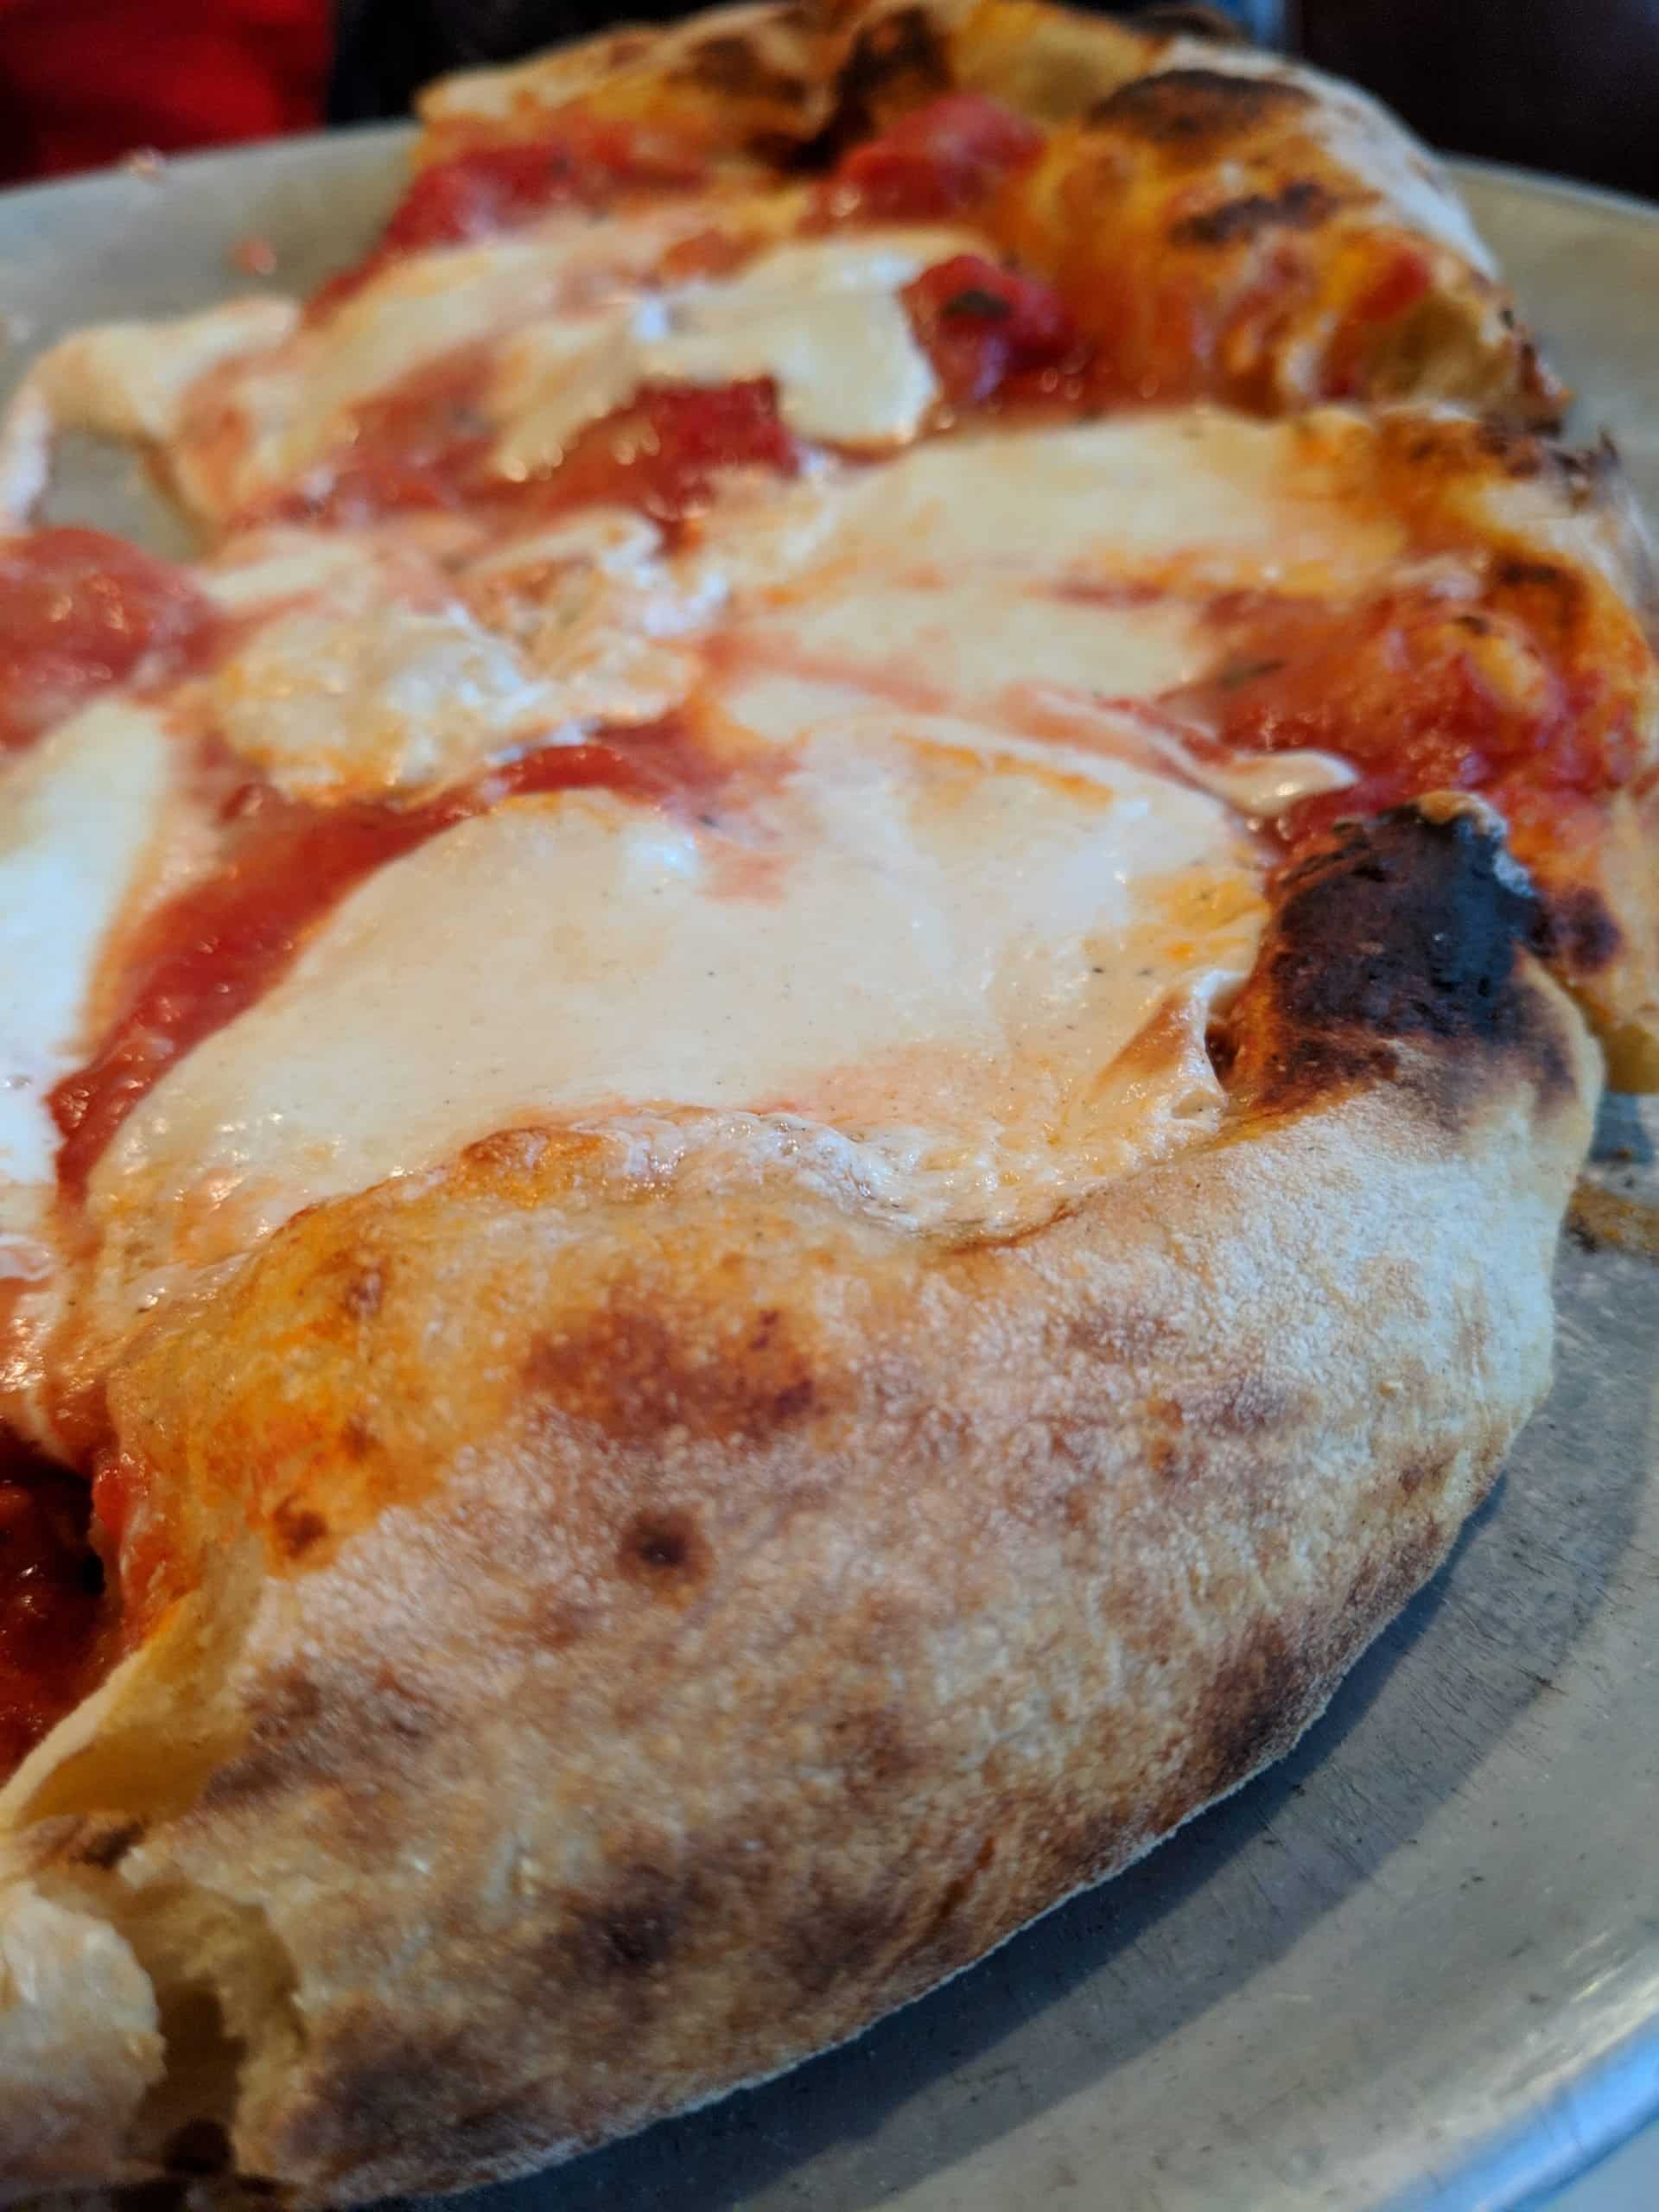 Craving Pizza? Look No Further than Mark's Pizzeria!